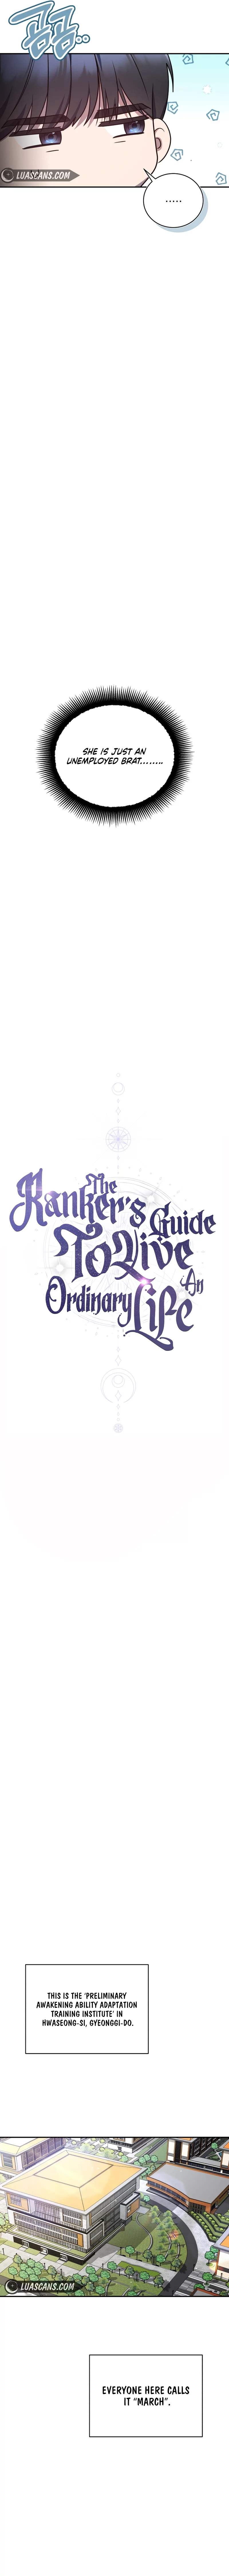 The Rankers Guide to Live an Ordinary Life HOT image